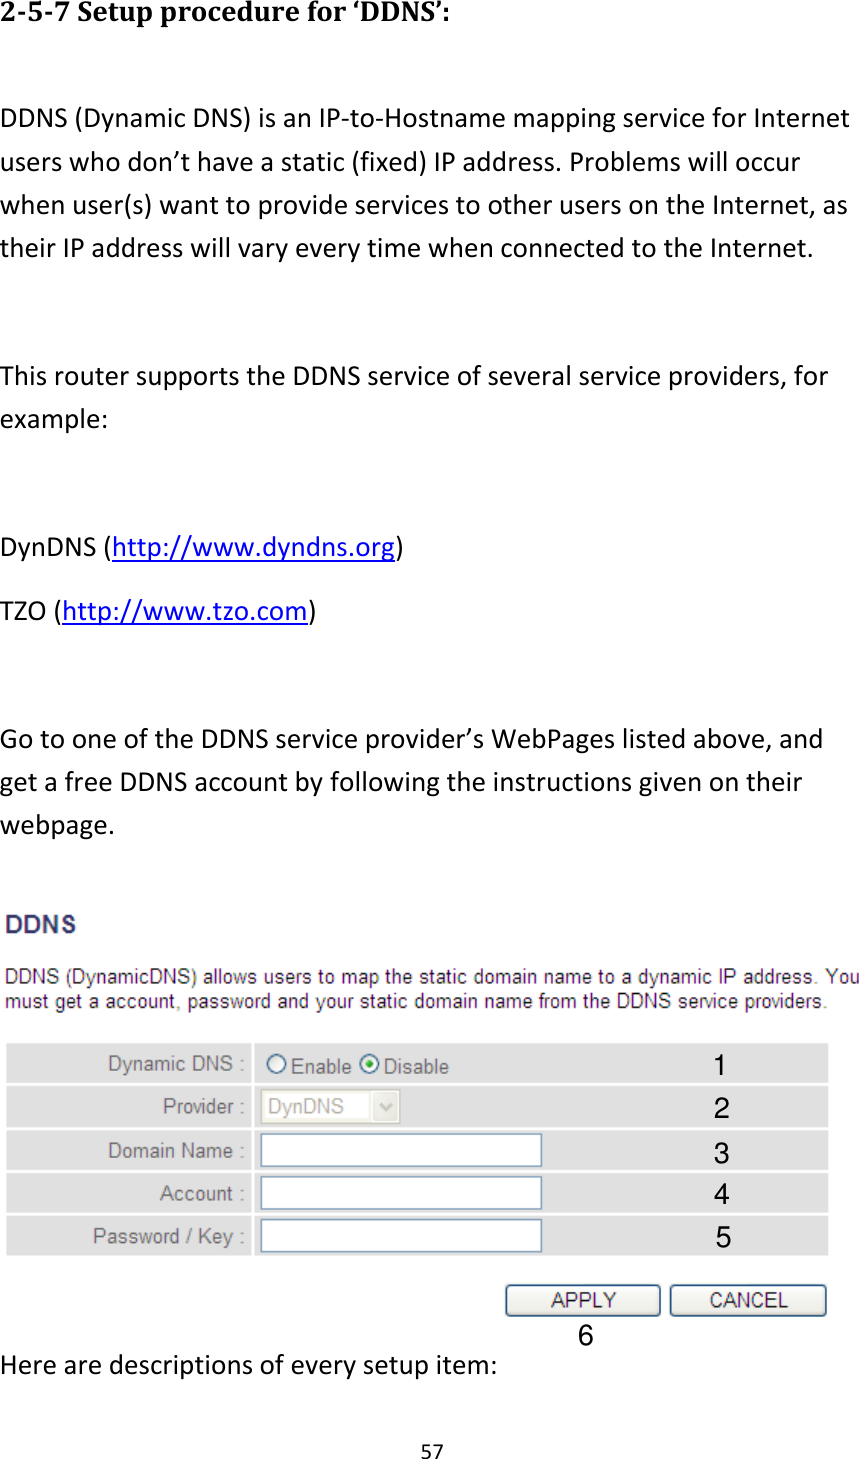 57 2-5-7 Setup procedure for ‘DDNS’:  DDNS (Dynamic DNS) is an IP-to-Hostname mapping service for Internet users who don’t have a static (fixed) IP address. Problems will occur when user(s) want to provide services to other users on the Internet, as their IP address will vary every time when connected to the Internet.  This router supports the DDNS service of several service providers, for example:  DynDNS (http://www.dyndns.org) TZO (http://www.tzo.com)  Go to one of the DDNS service provider’s WebPages listed above, and get a free DDNS account by following the instructions given on their webpage.   Here are descriptions of every setup item: 1 2 3 4 5 6 